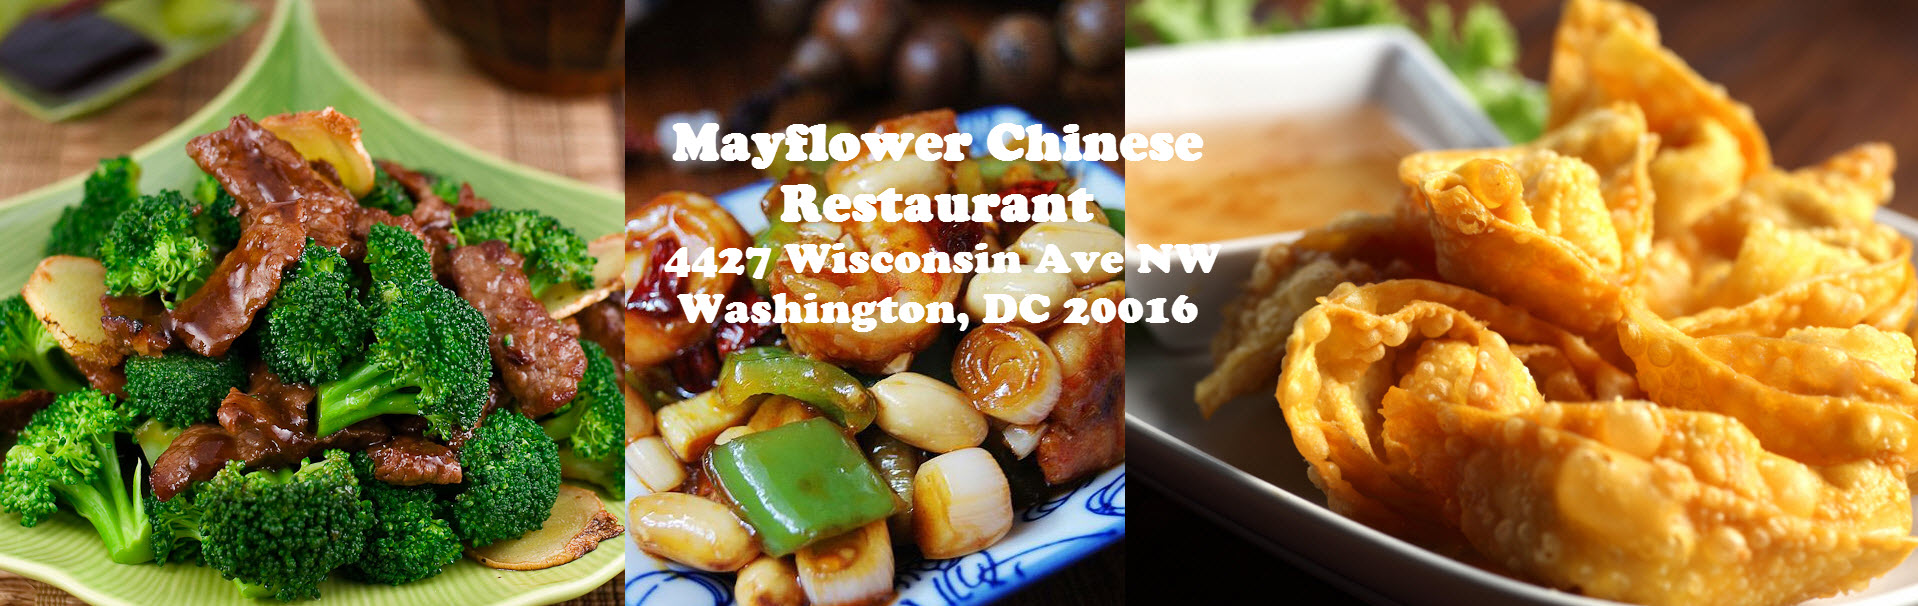 Your favorite Chinese food at Mayflower Chinese Restaurant